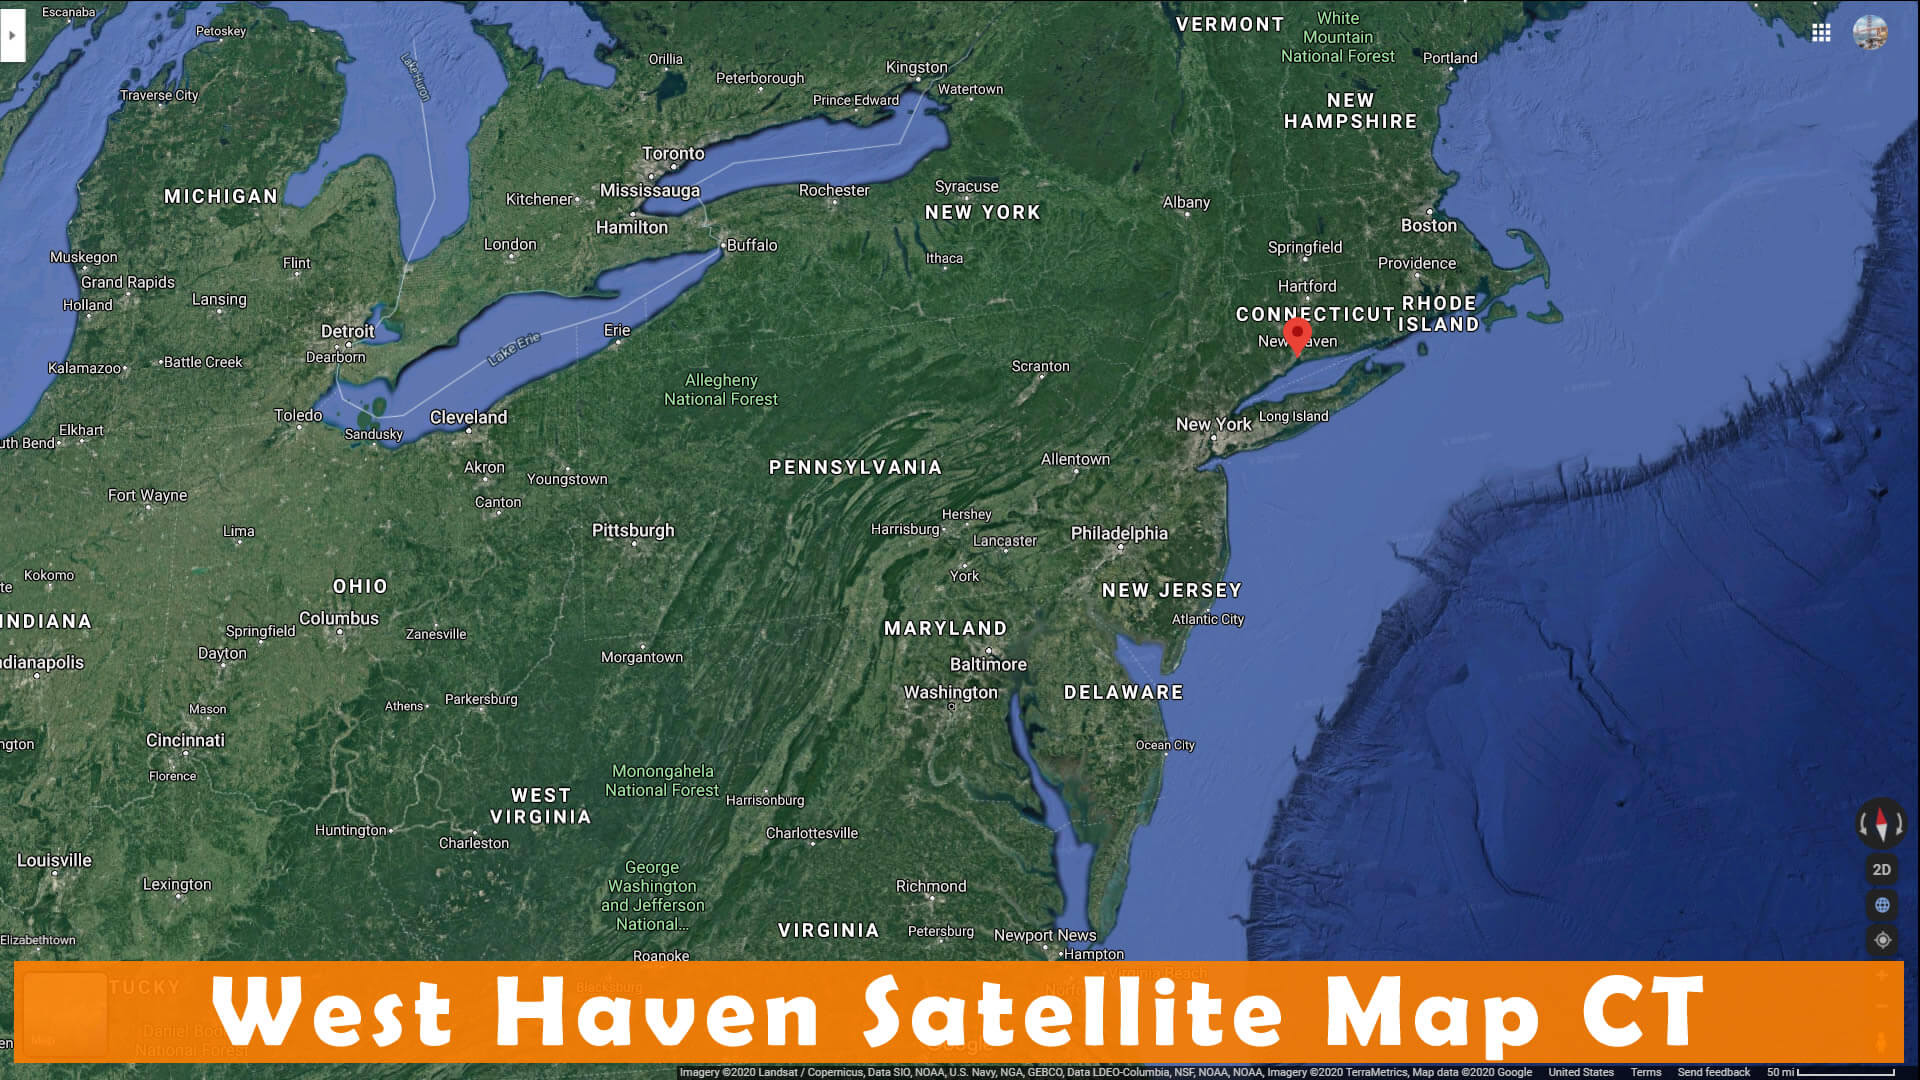 West Haven Satellite Map CT